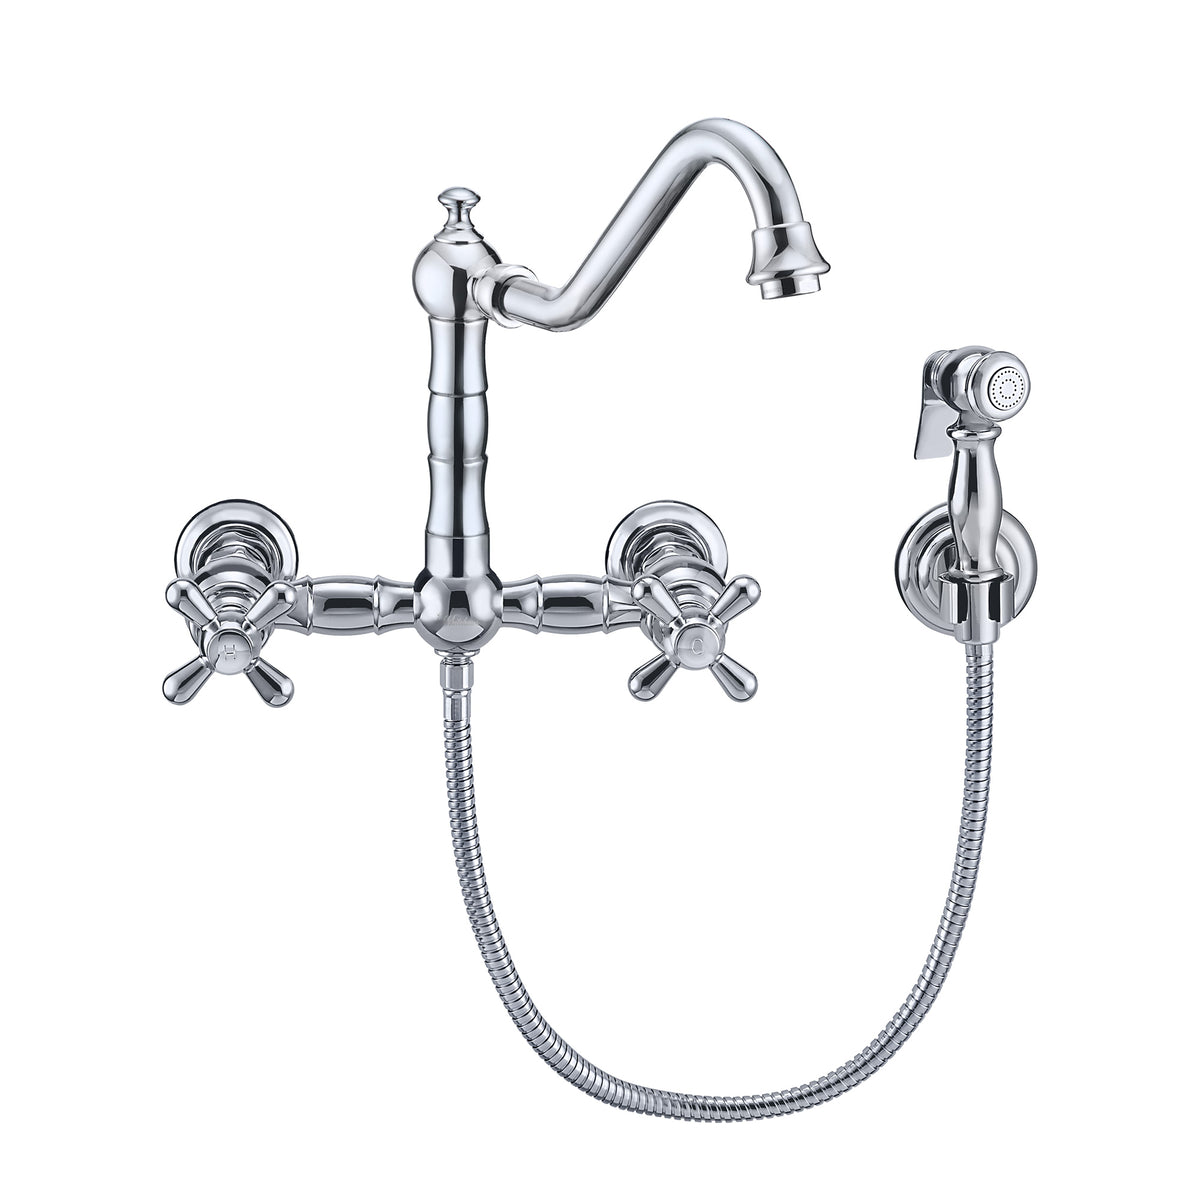 Vintage III Plus Wall Mount Faucet with a Long Traditional Swivel Spou -  Whitehaus Collection